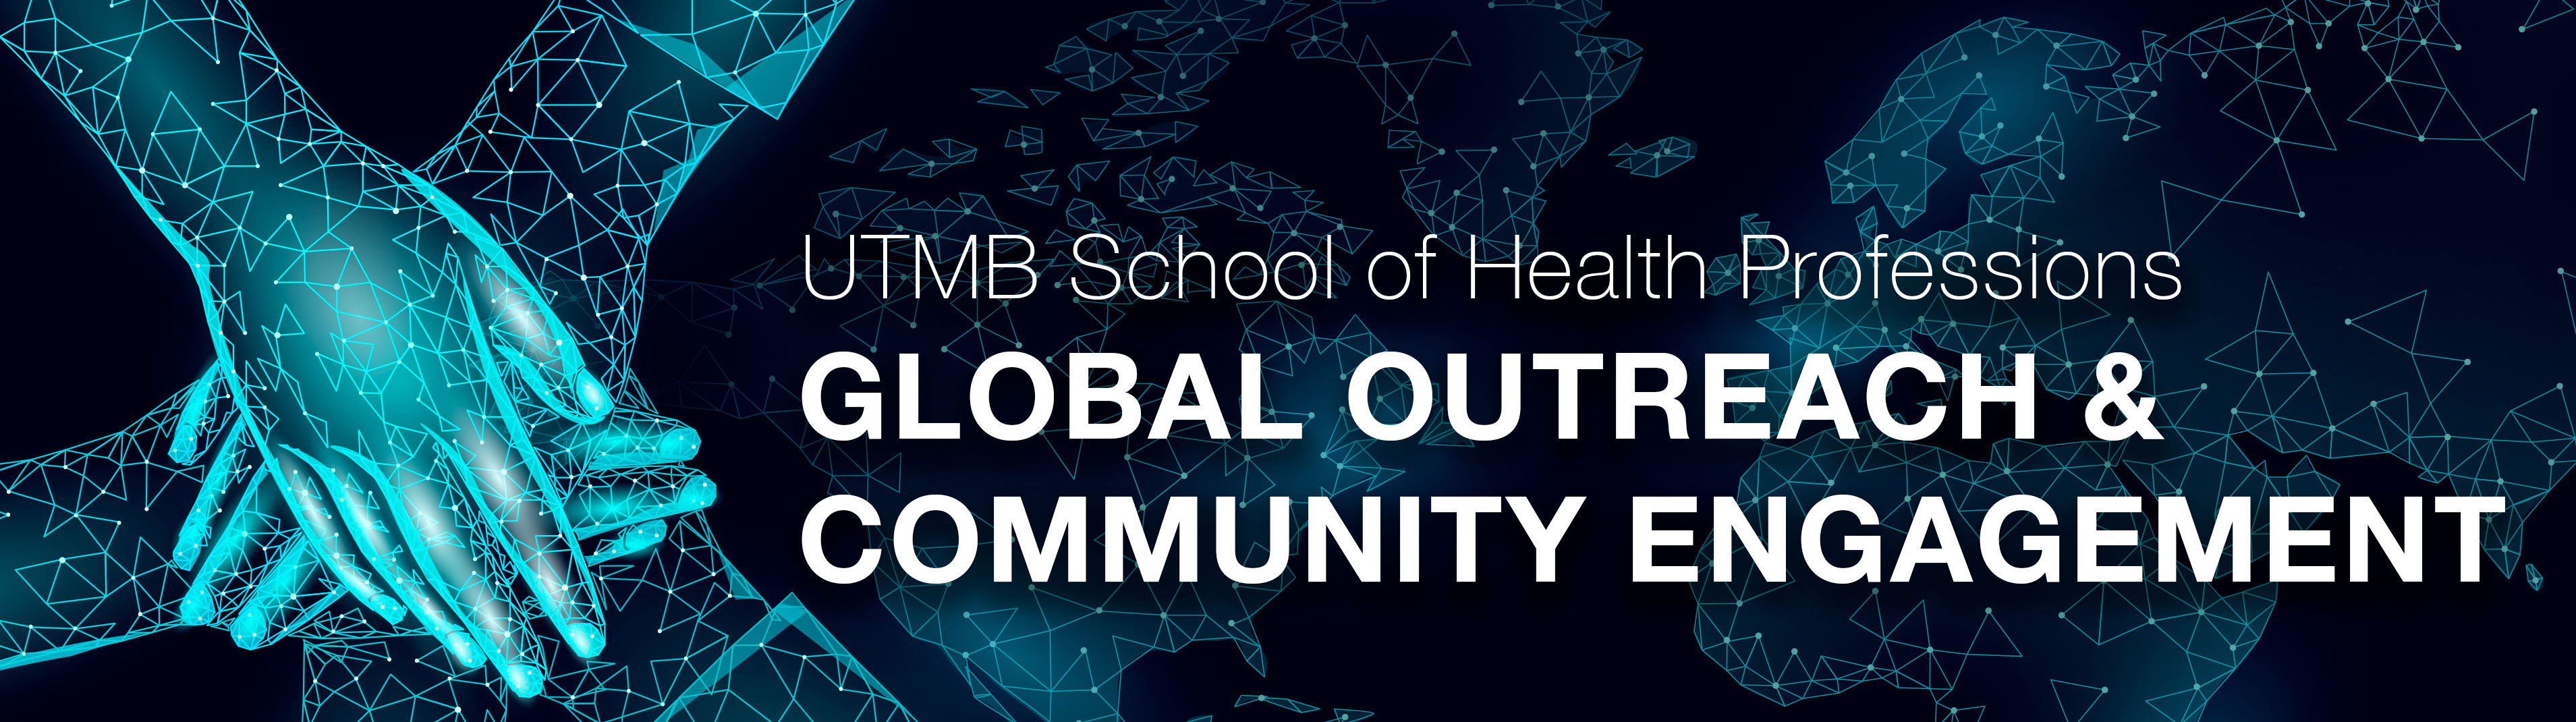 UTMB Health School of Health Professions Global Outreach and Community Engagement